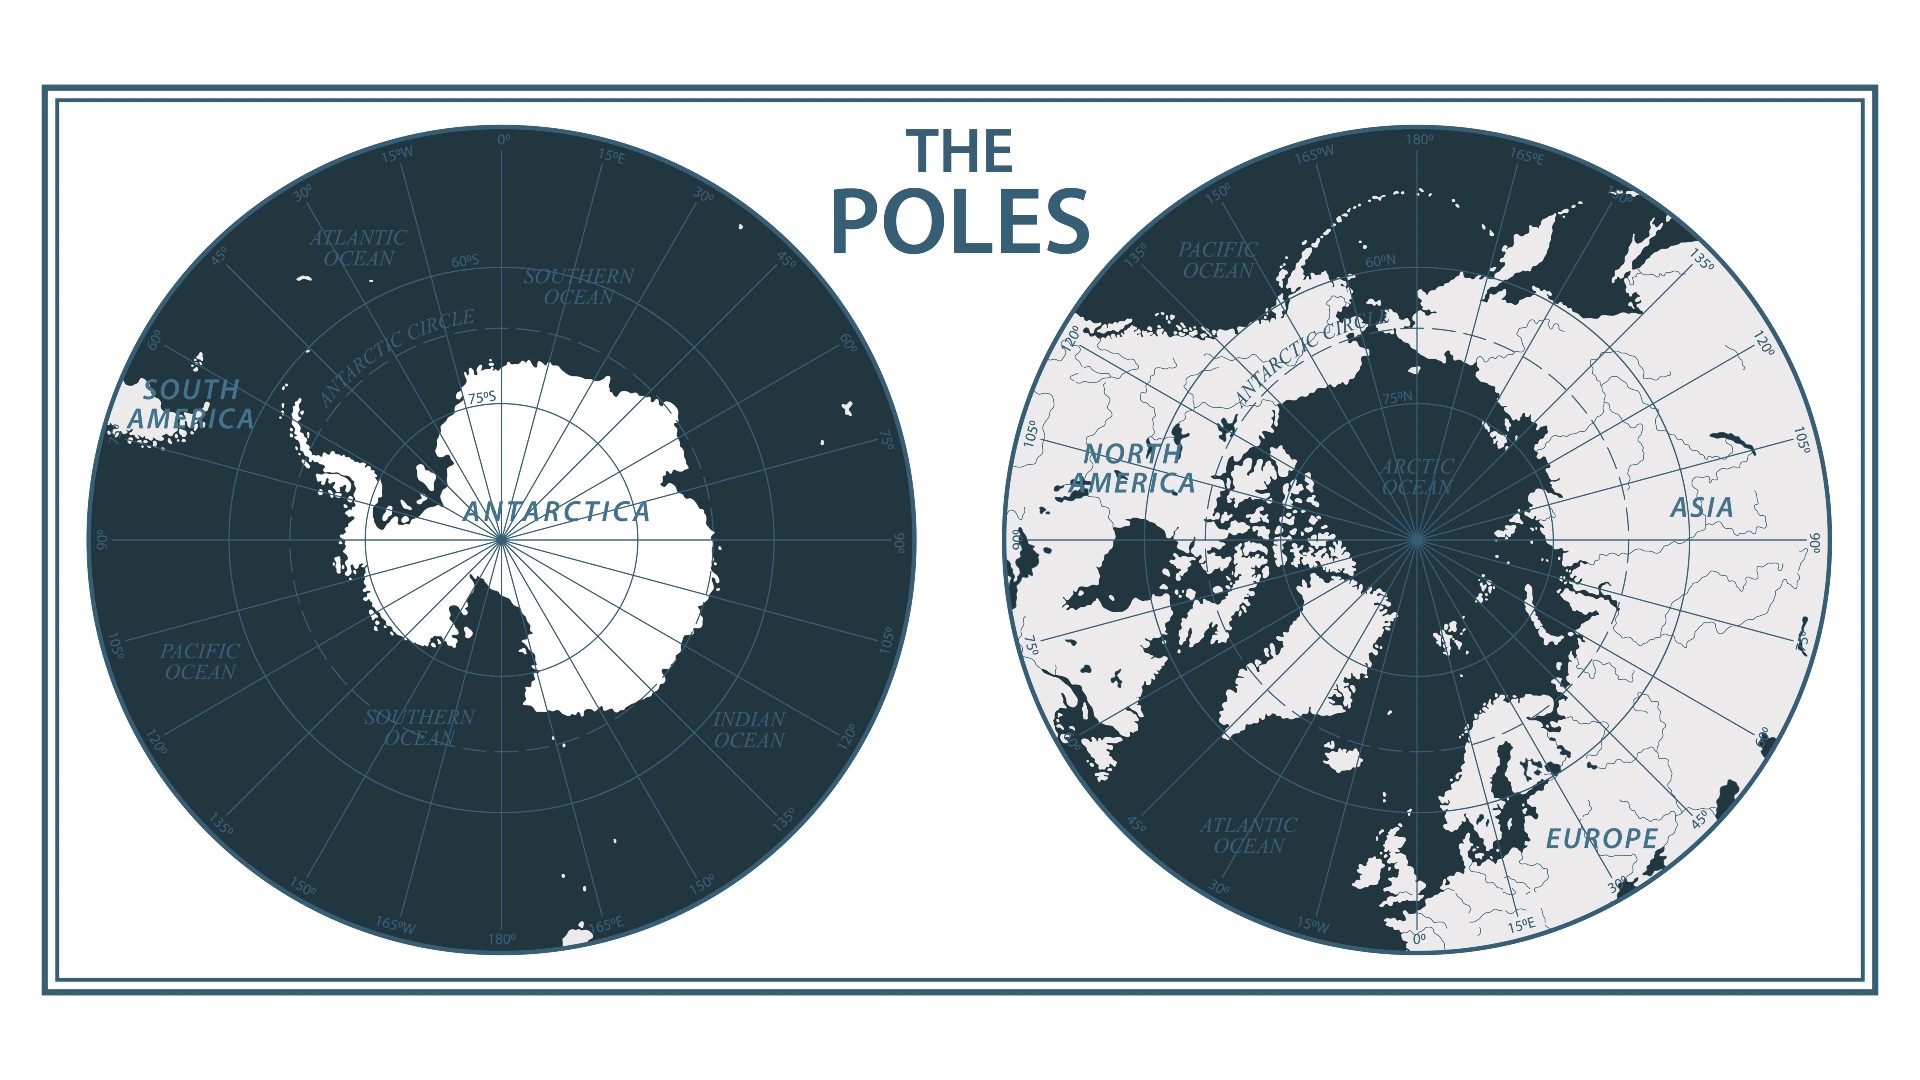 Two black and white maps side by side comparing the North Pole and South Pole.